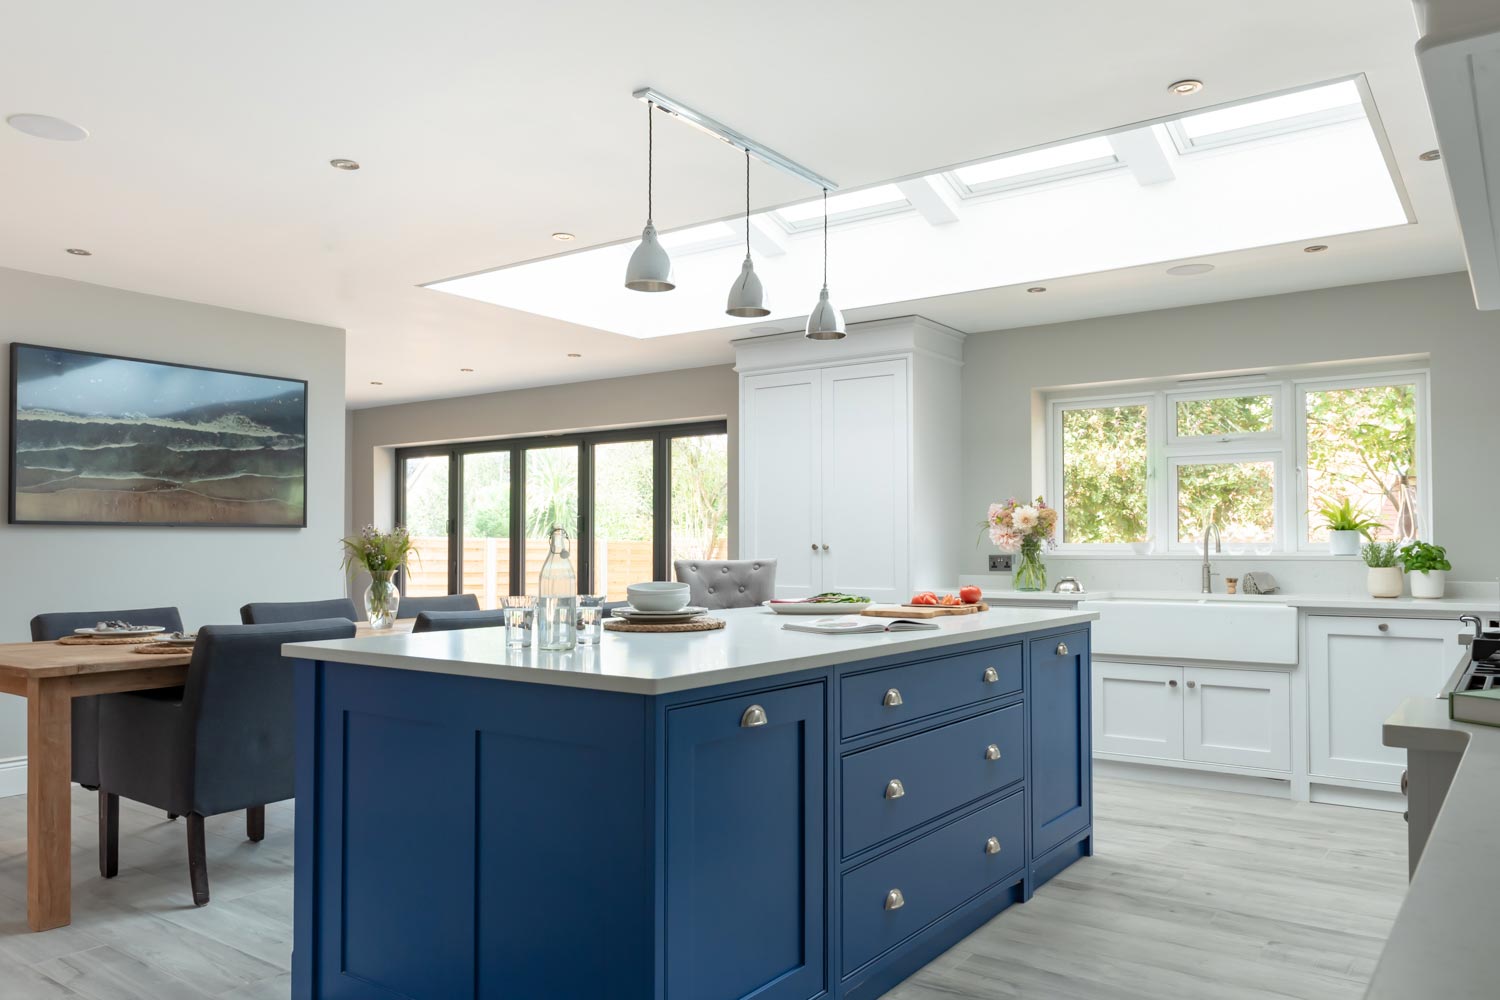 The Foxhills Kitchen by Shere Kitchens - beautiful kitchens handmade in Shere Guildford Surrey